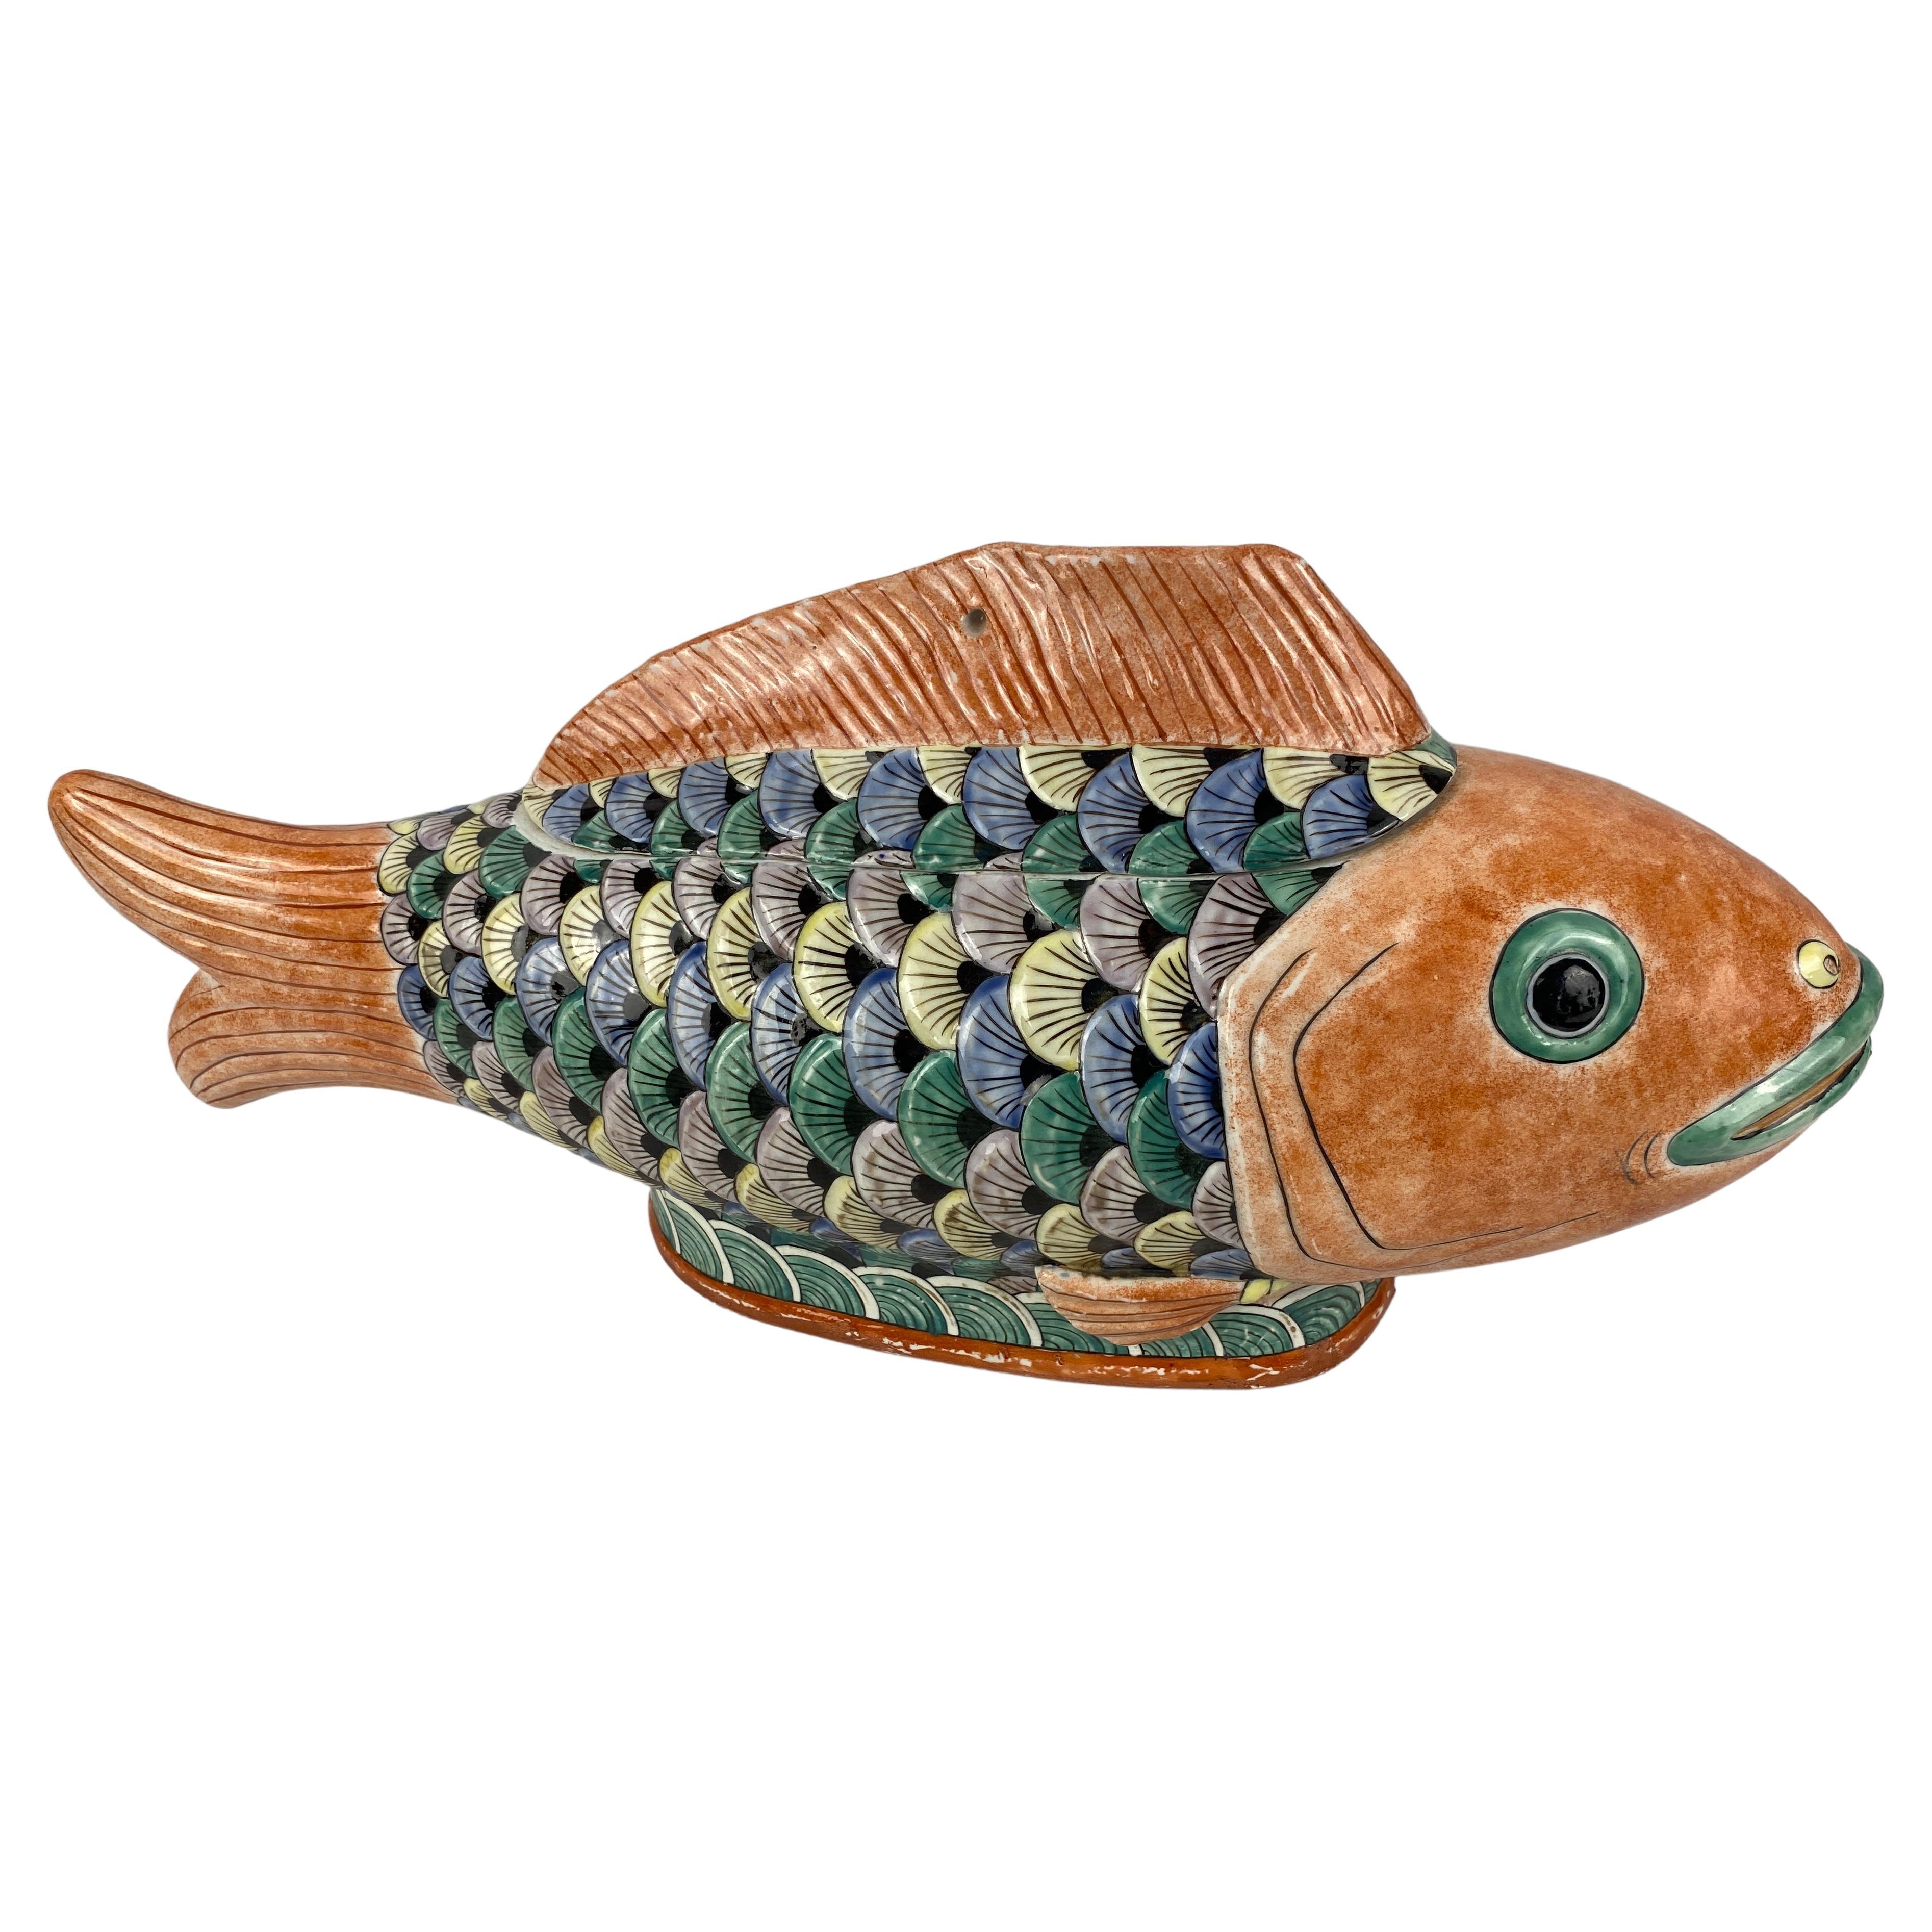 Hand-Crafted Ceramic Fish For Sale